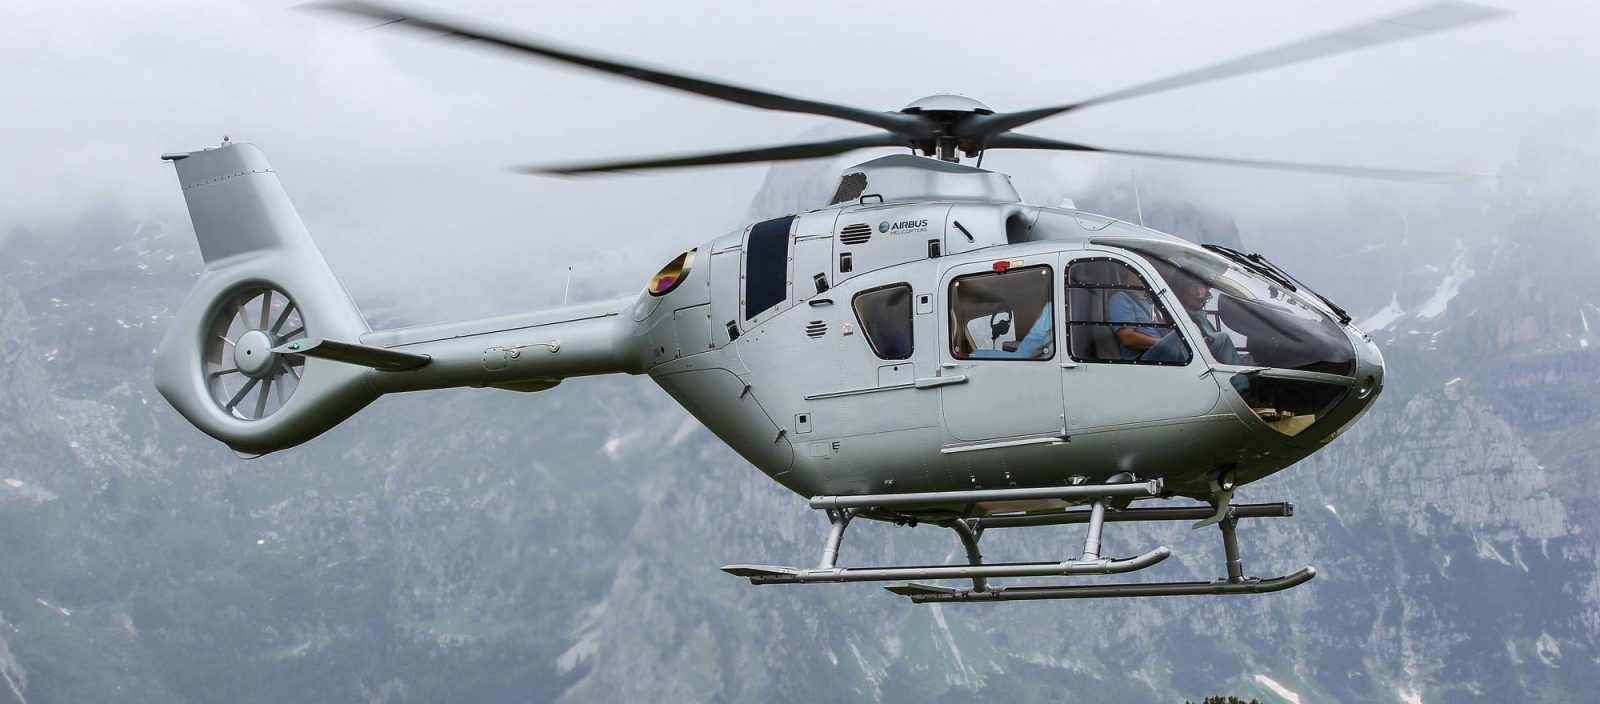 Royal Thai Air Force Receives New H135 Training Helicopters